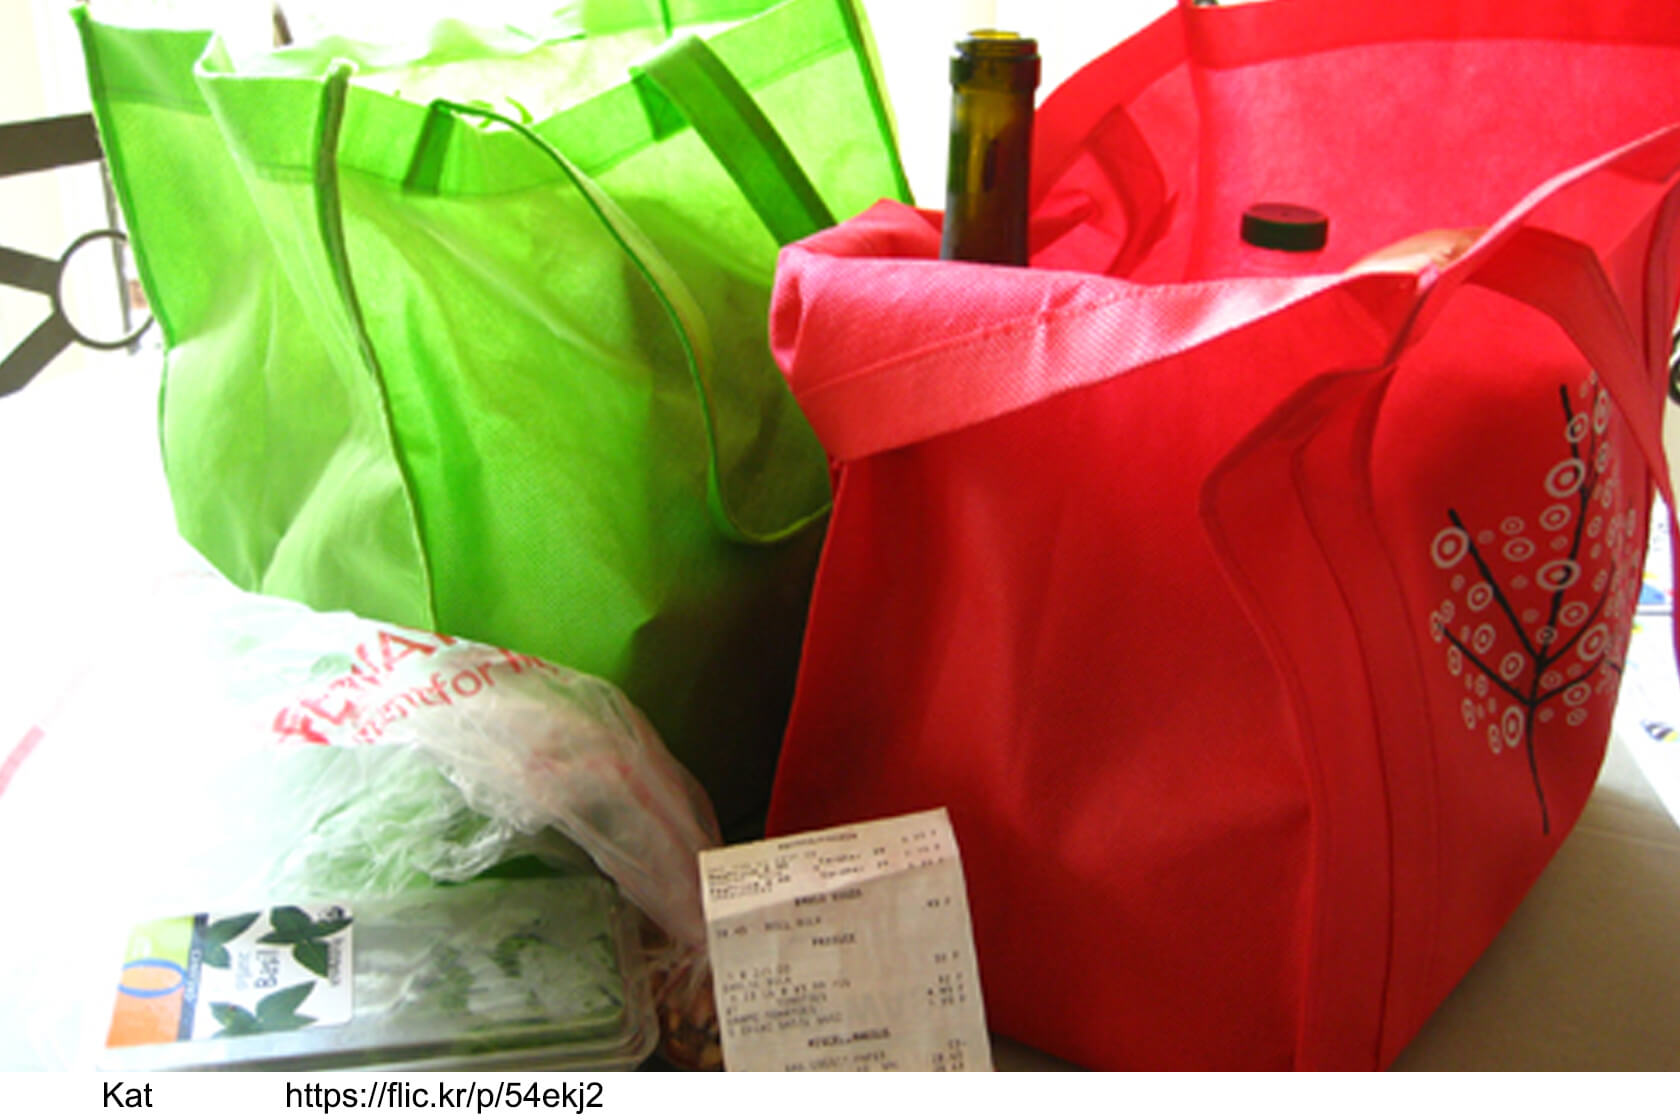 Image of reusable shopping bags.